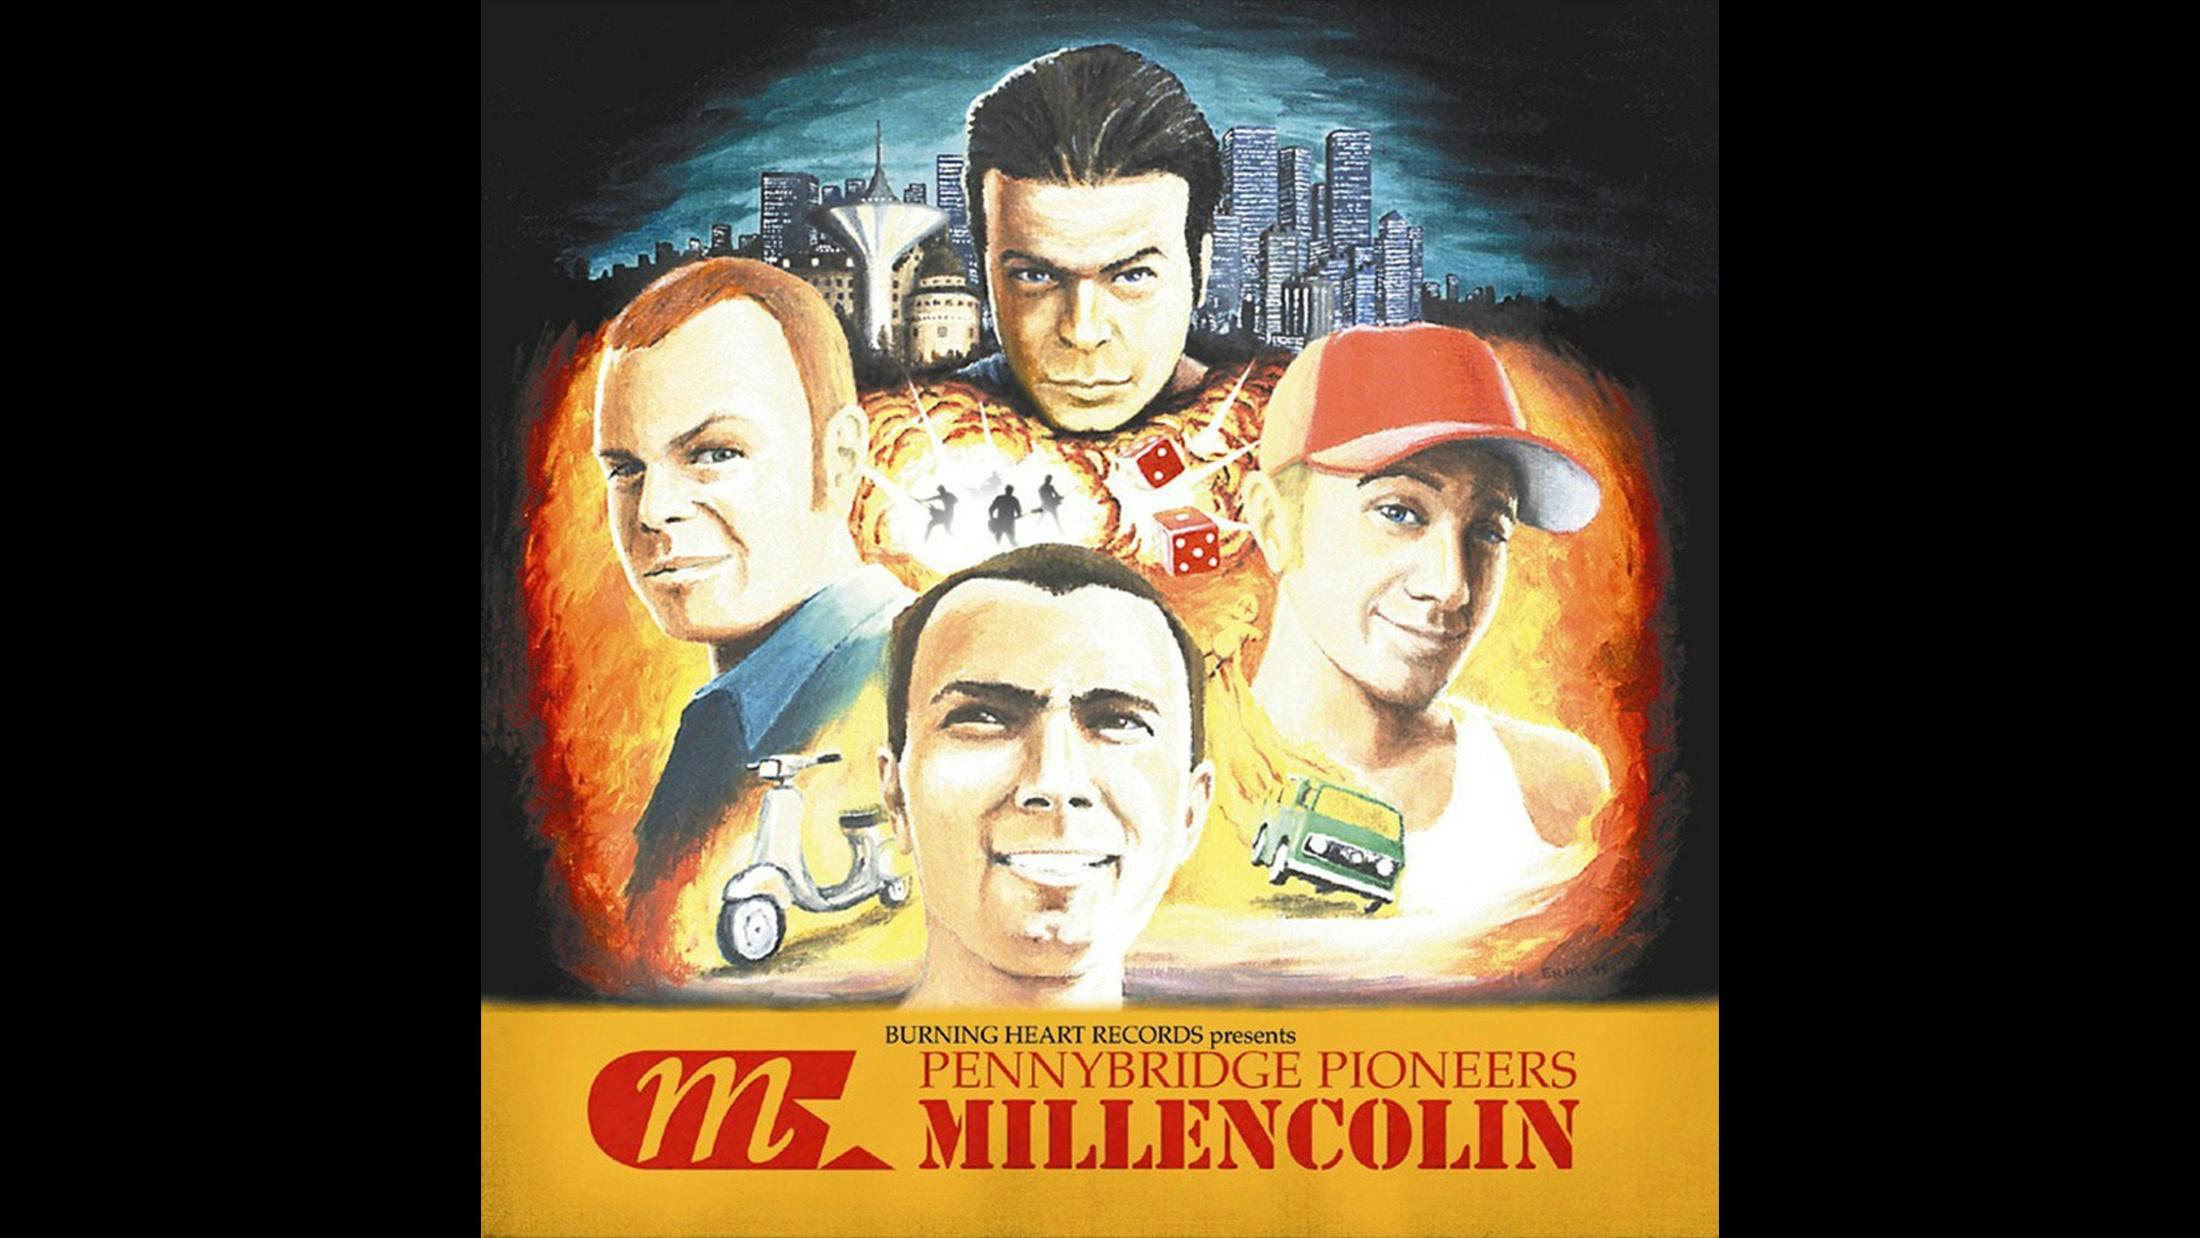 Starting life as a ska-punk crossover act, Millencolin condensed their sound to a driving, melodic assault on their fourth album (named after their home town of Örebro, which literally translates to ‘Penny Bridge’). They might not have been pioneers, but they encapsulated the skate-punk scene of the early 2000s.